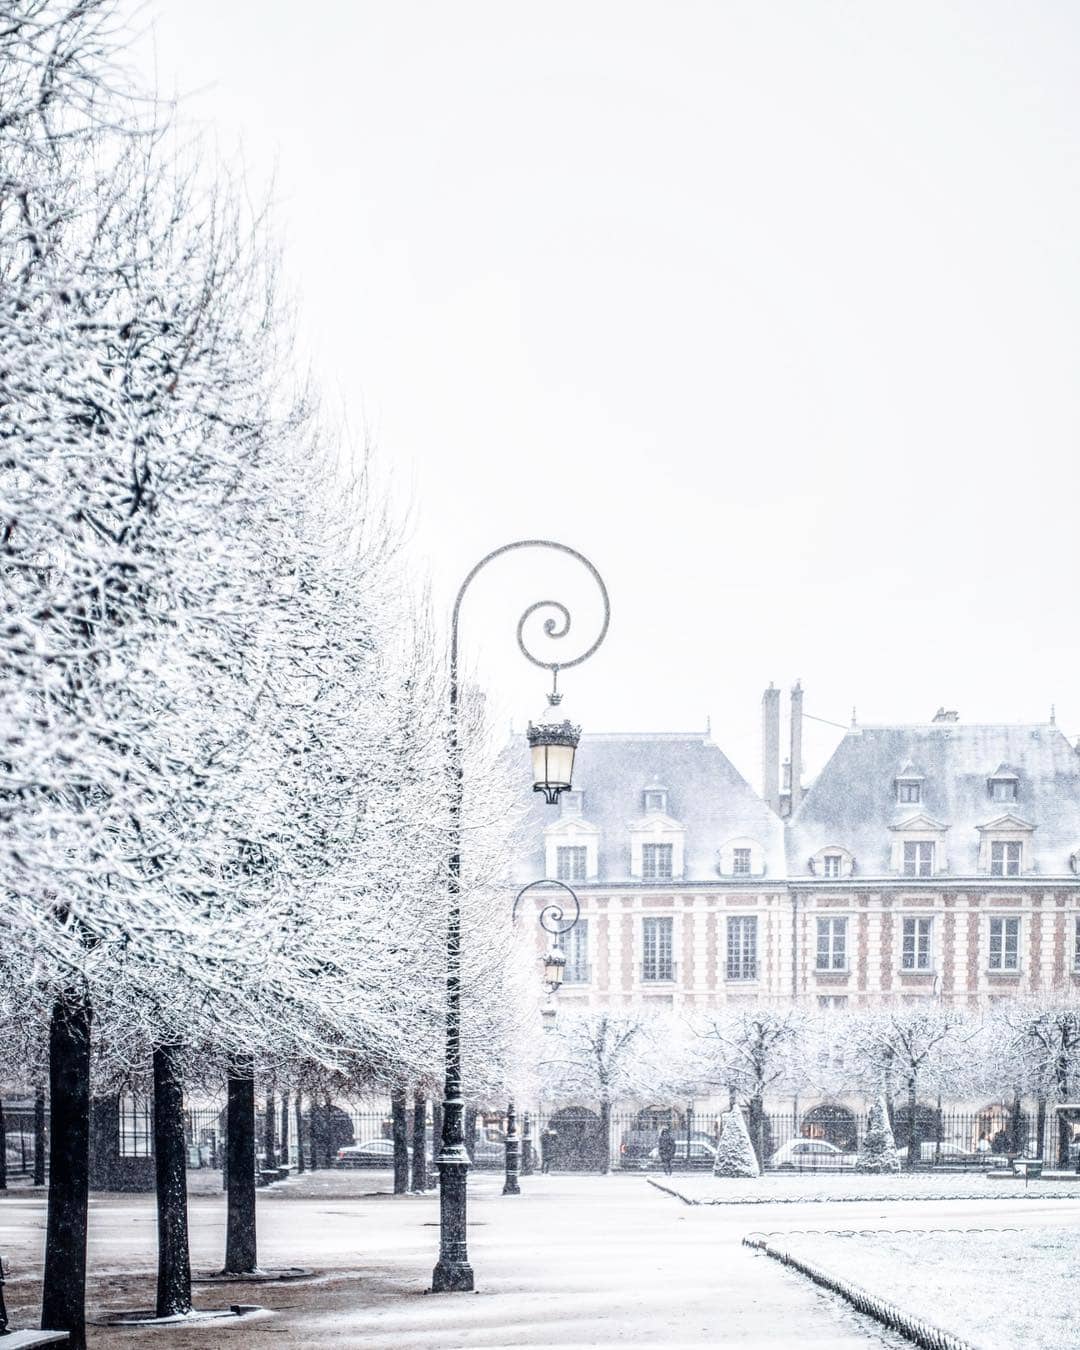 Paris during the wintertime and snow